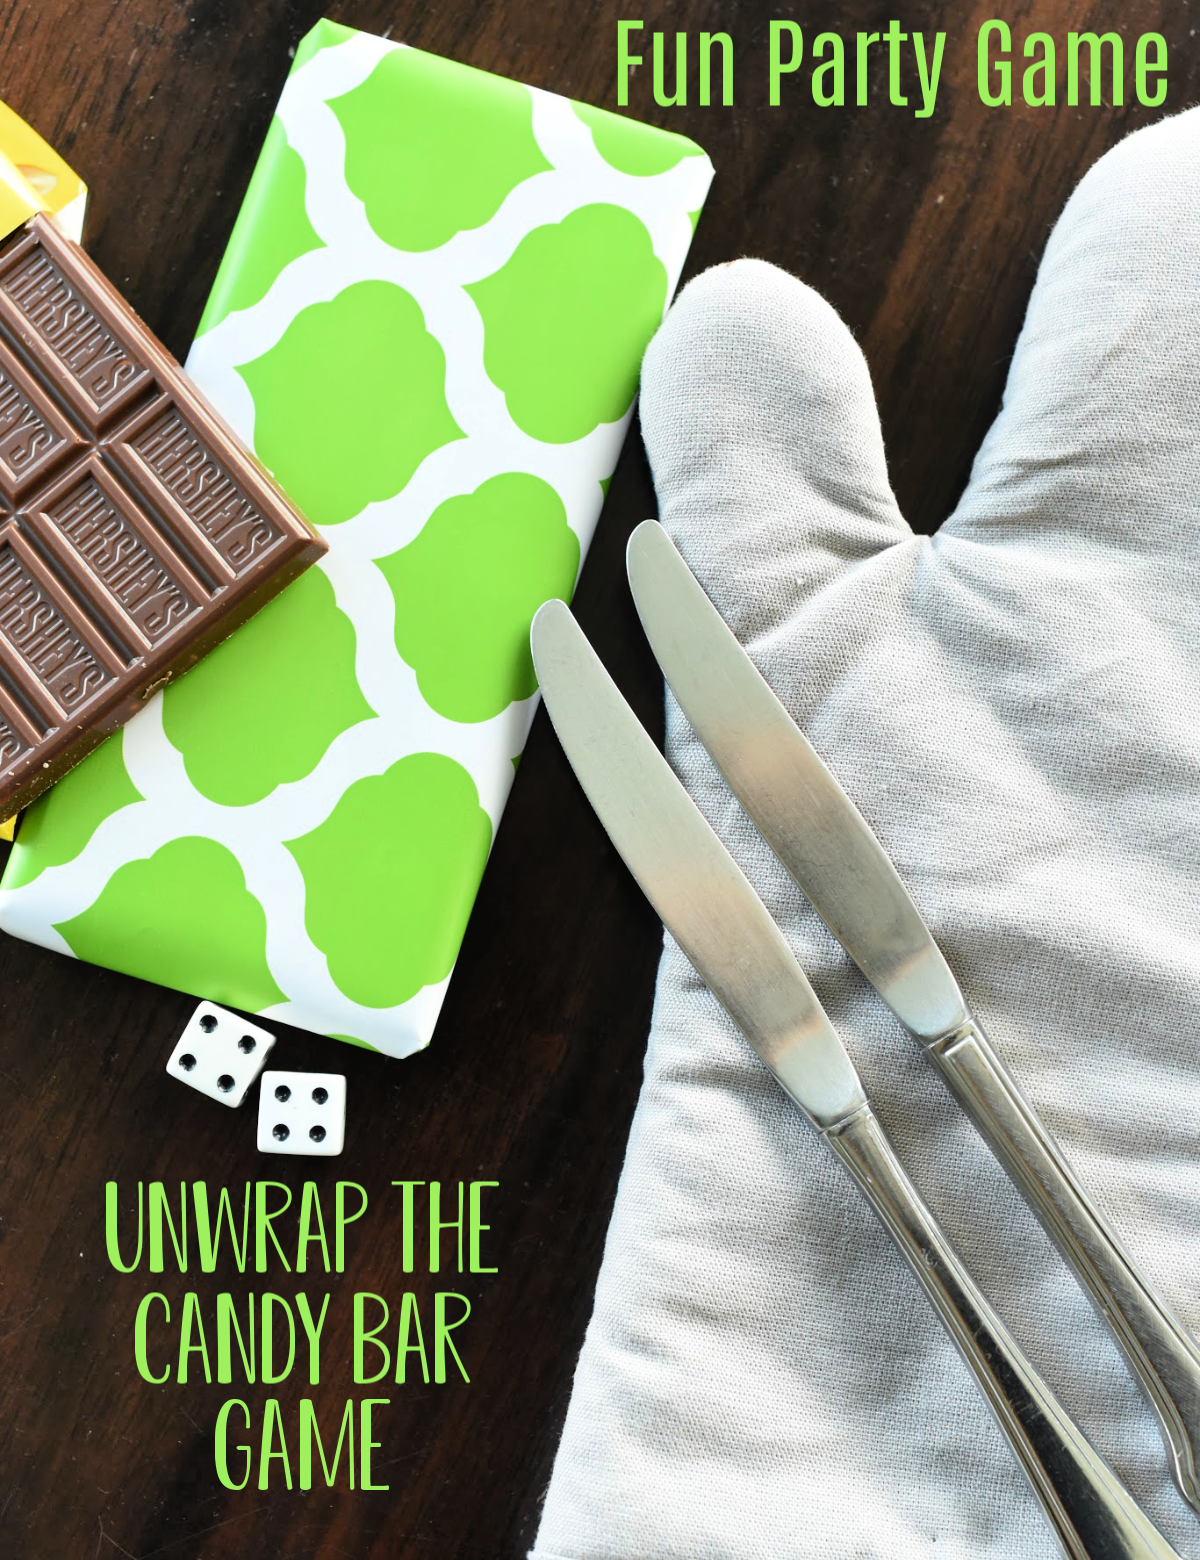 Fun unwrap the candy bar game! For all ages!